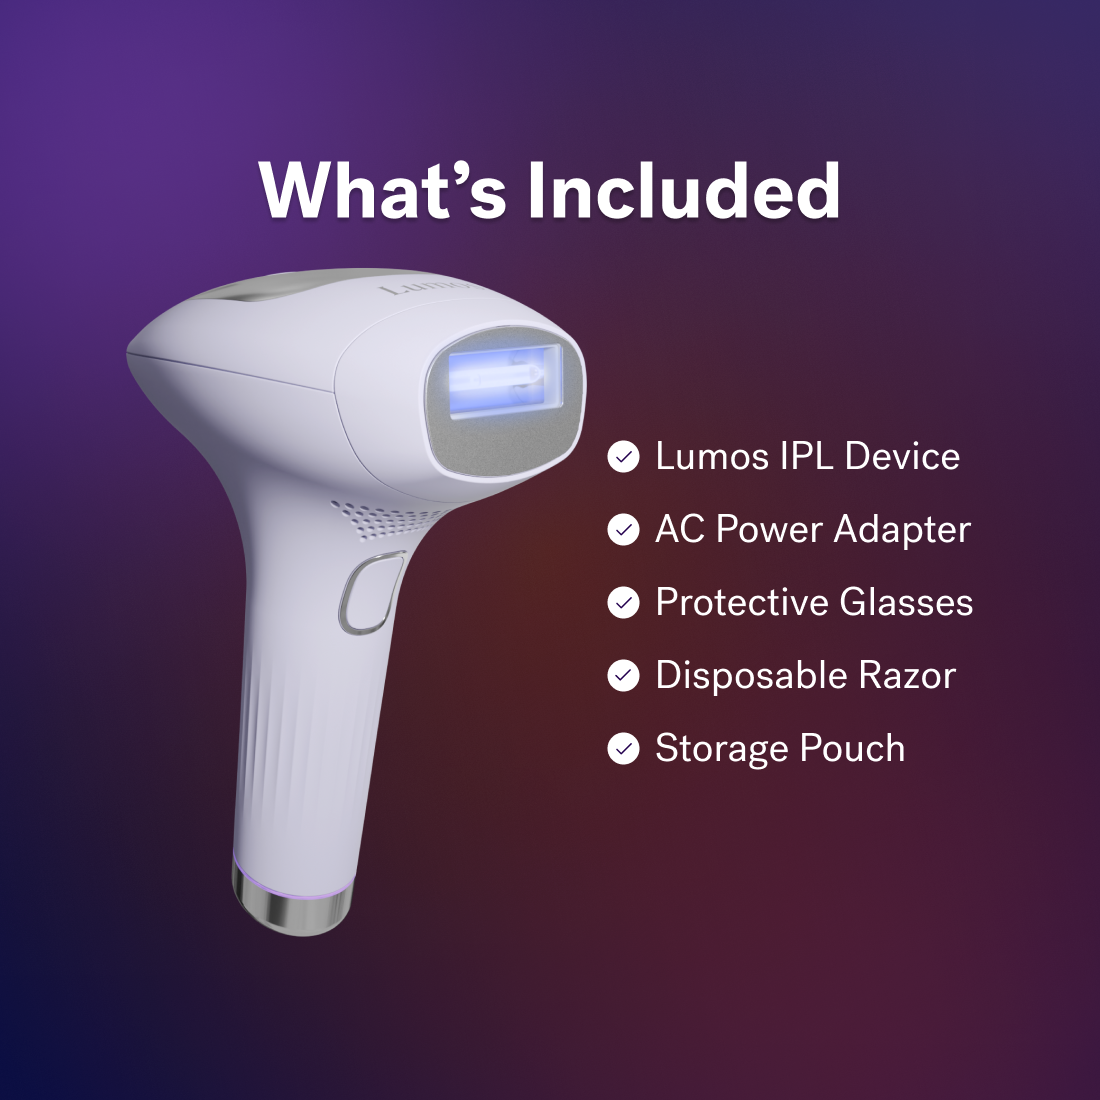 Lavender Lust - Image displaying a Michael Todd Beauty Lumos IPL device for at-home hair removal with a list of included items: AC power adapter, protective glasses, disposable razor, and storage pouch, against a gradient background. The device features COOLMAX cooling technology for enhanced comfort.